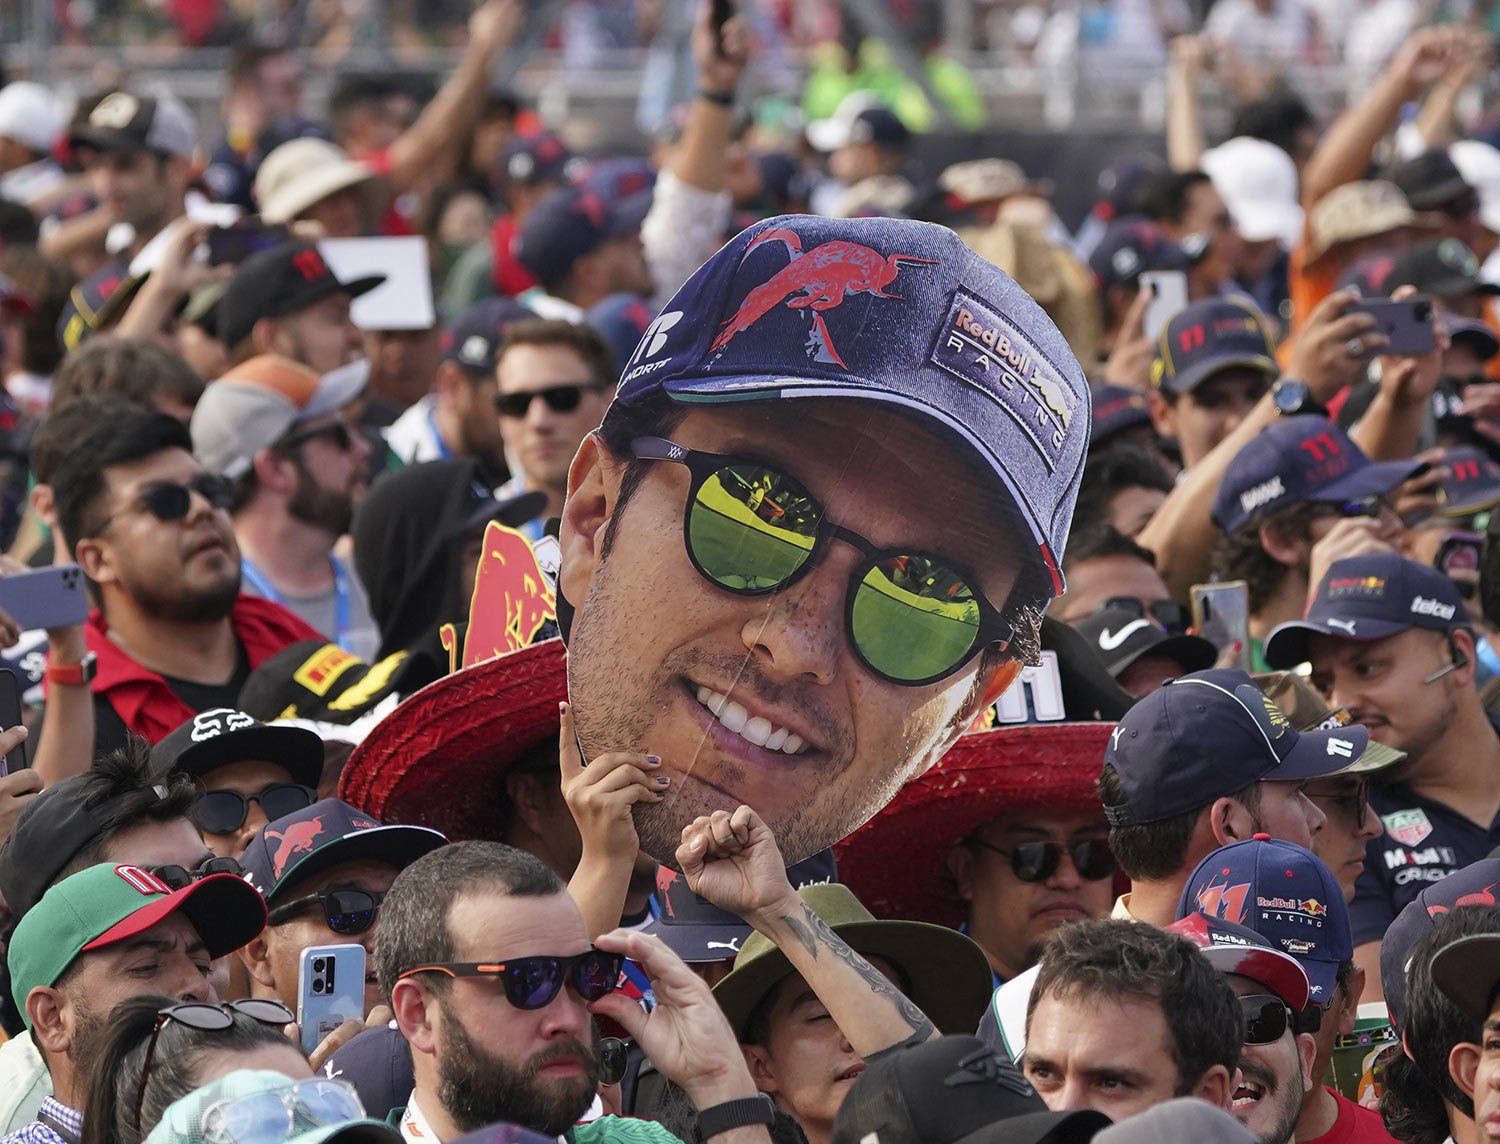  Fans celebrate with a cardboard cutout of Red Bull driver, Mexican Sergio Perez, at the end of the Formula One Mexico Grand Prix at the Hermanos Rodriguez racetrack in Mexico City, Sunday, Oct. 30, 2022. Perez placed third. (AP Photo/Fernando Llano)